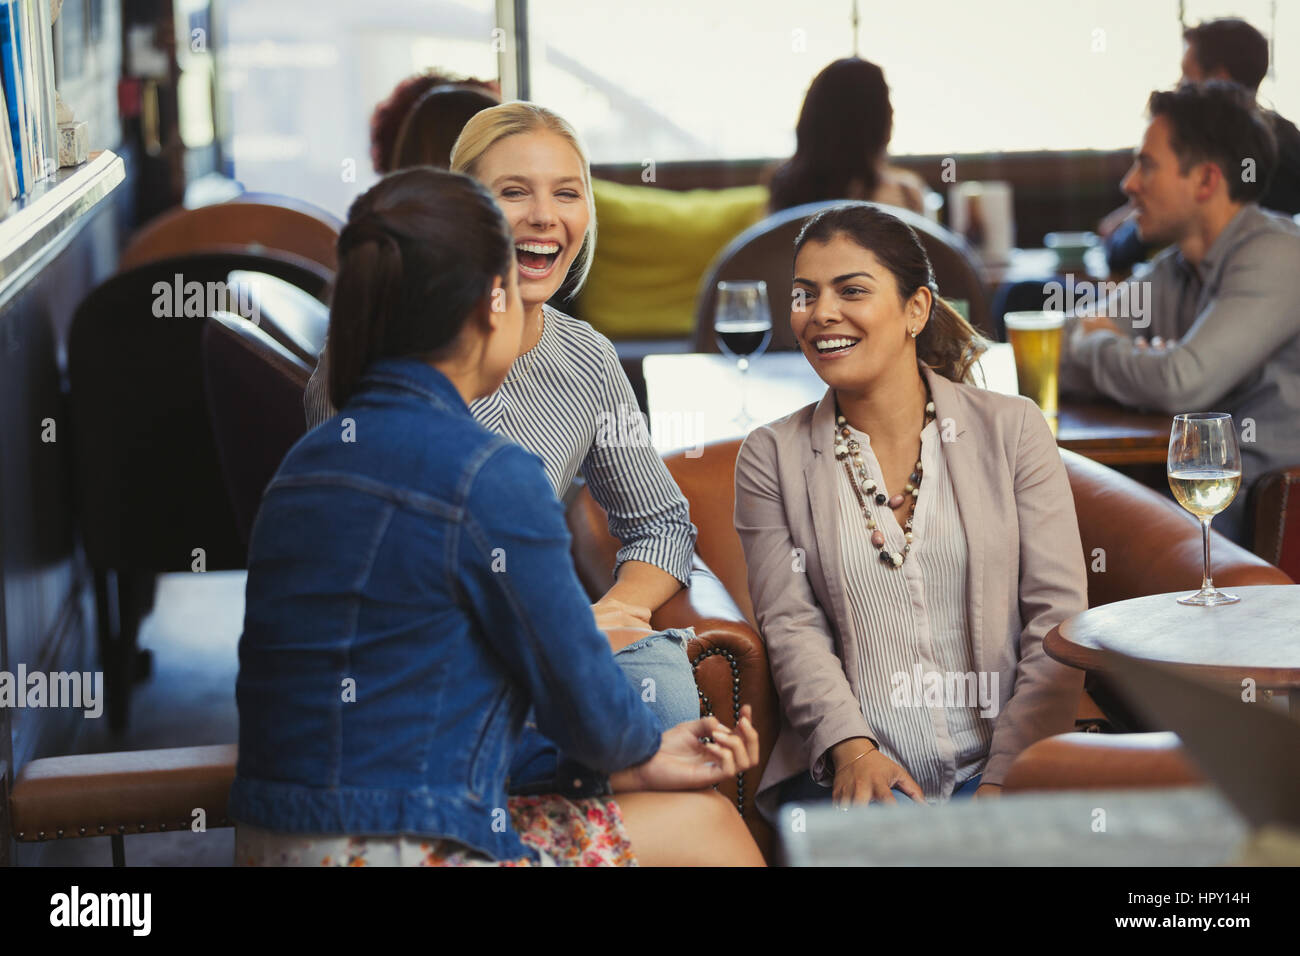 Laughing women friends talking and drinking wine in bar Stock Photo